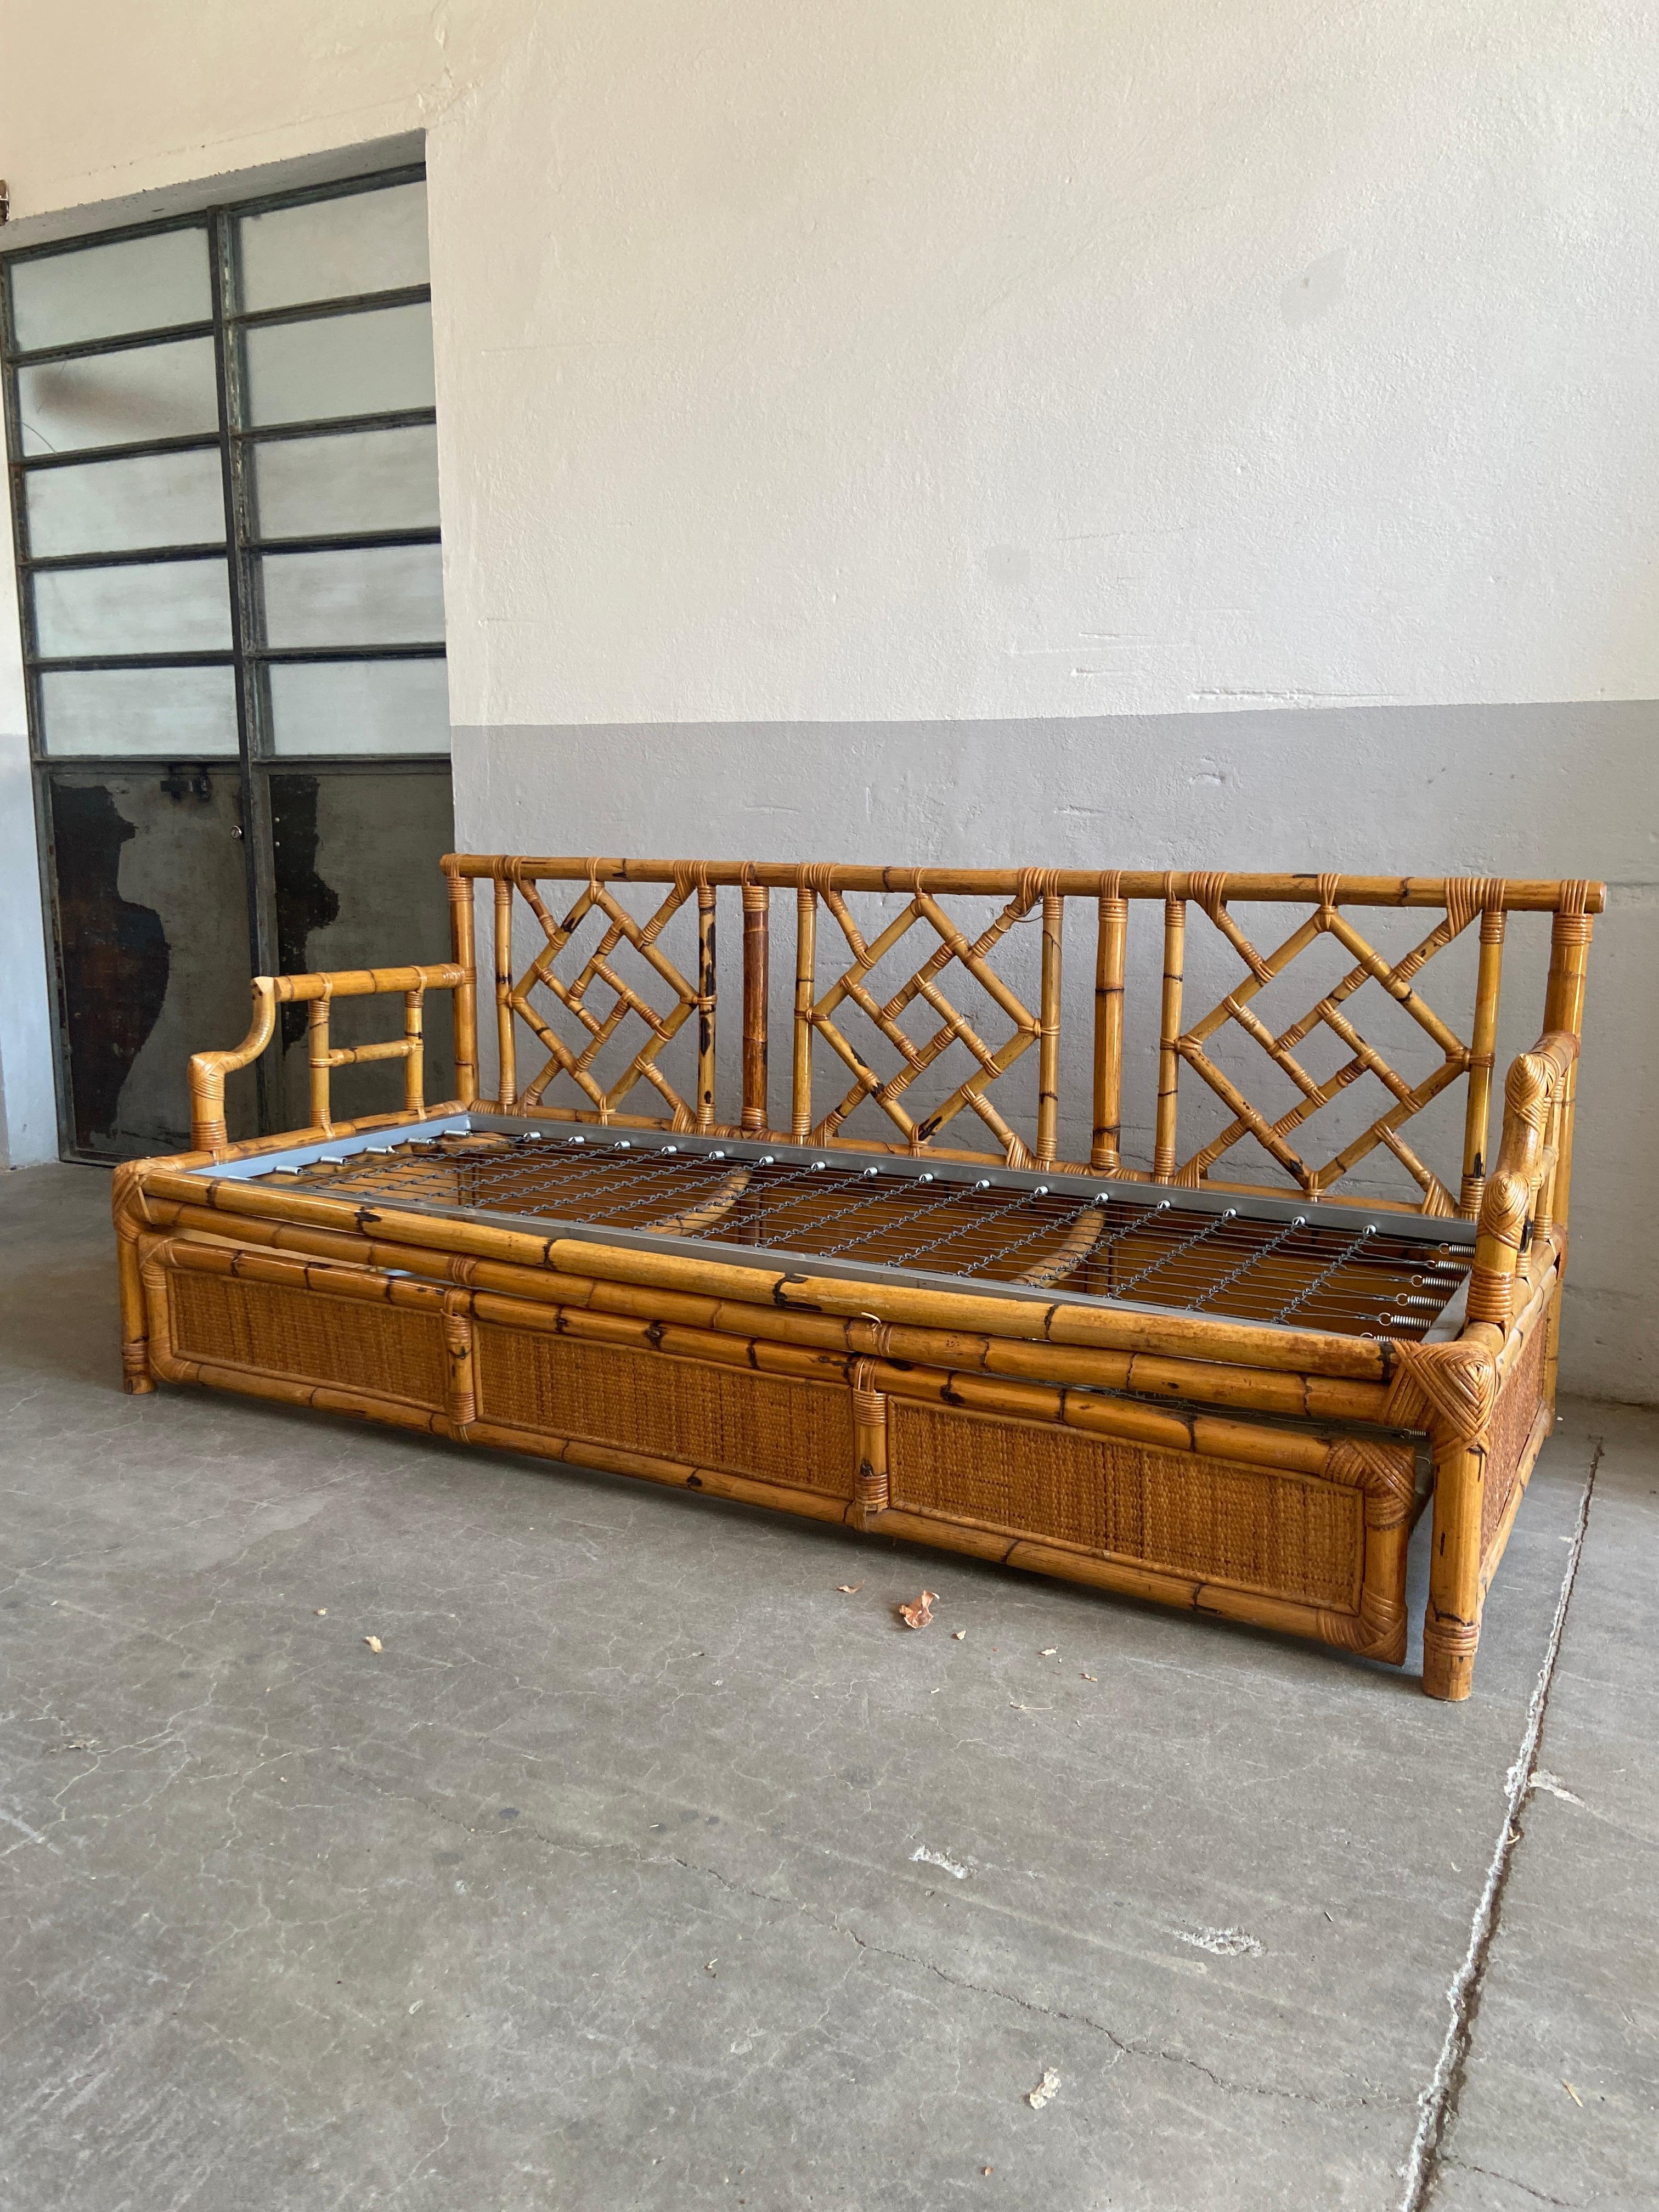 Mid-Century Modern Italian bamboo sofa by Vivai del Sud.
This sofa can become a comfortable single bed. From the part under the seat another bed can be pulled out. The bedsteads are original from the period but are in very good condition
Wear